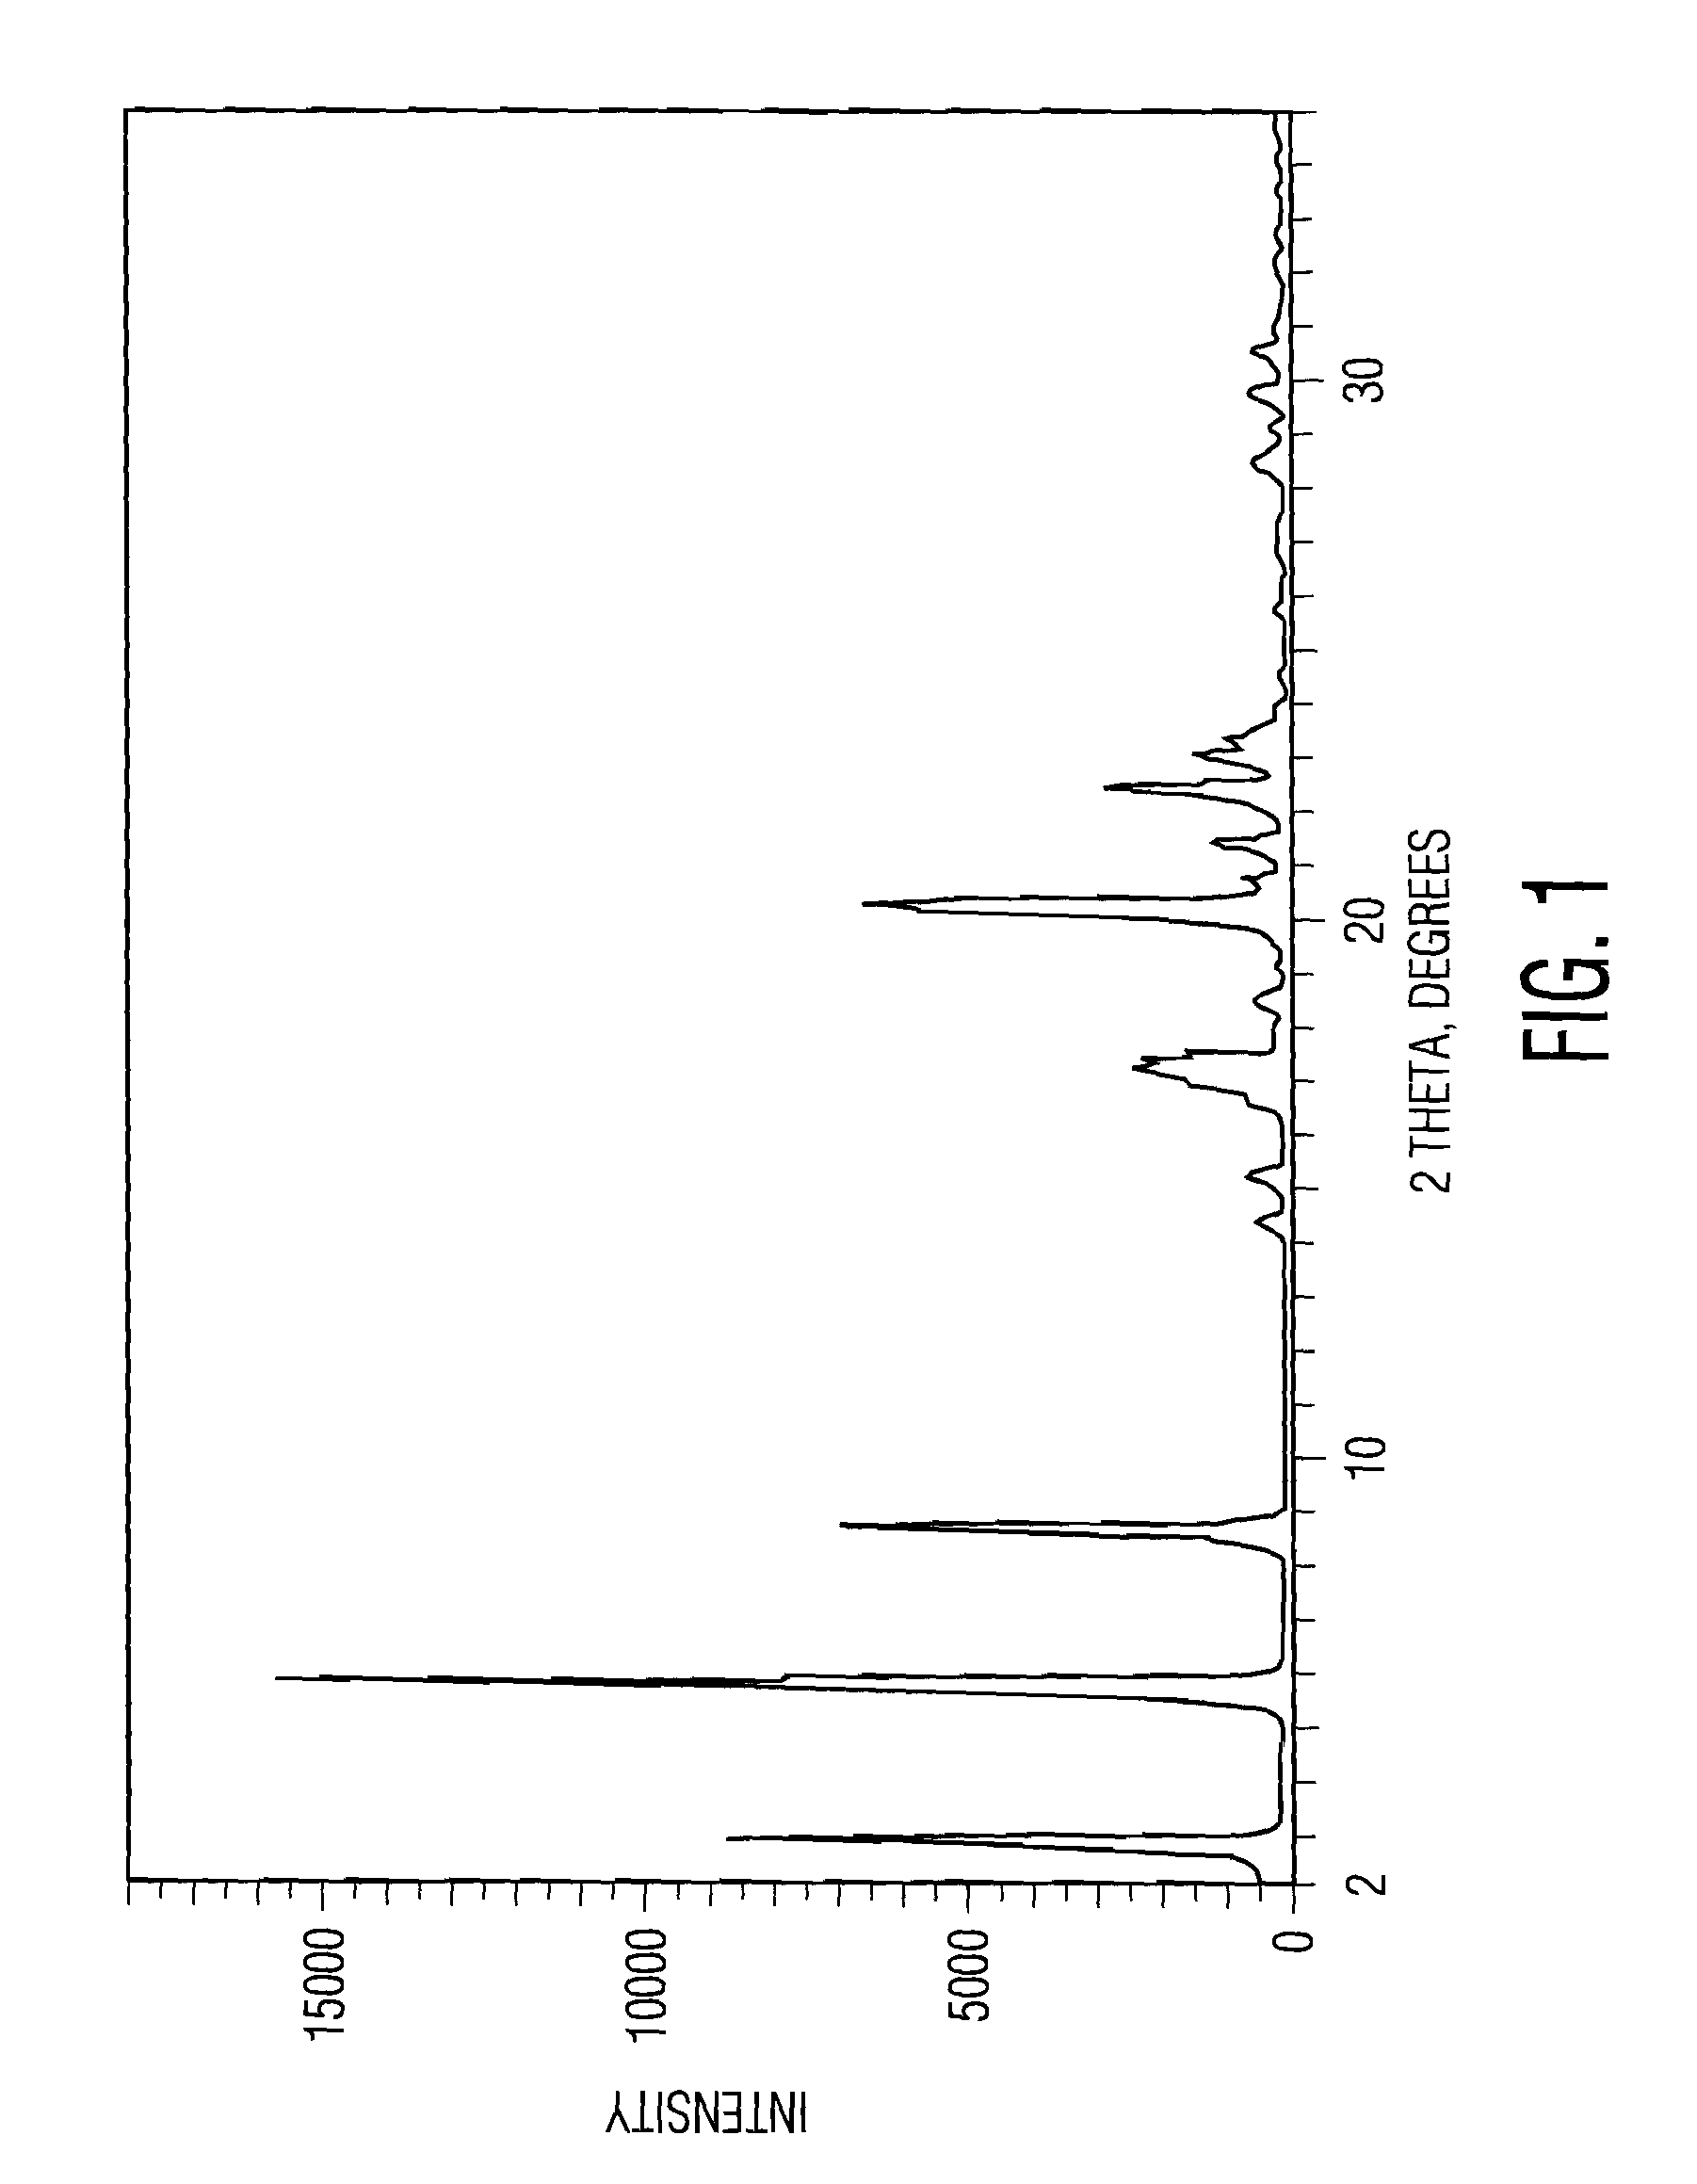 Synthesis, polymorphs, and pharmaceutical formulation of faah inhibitors